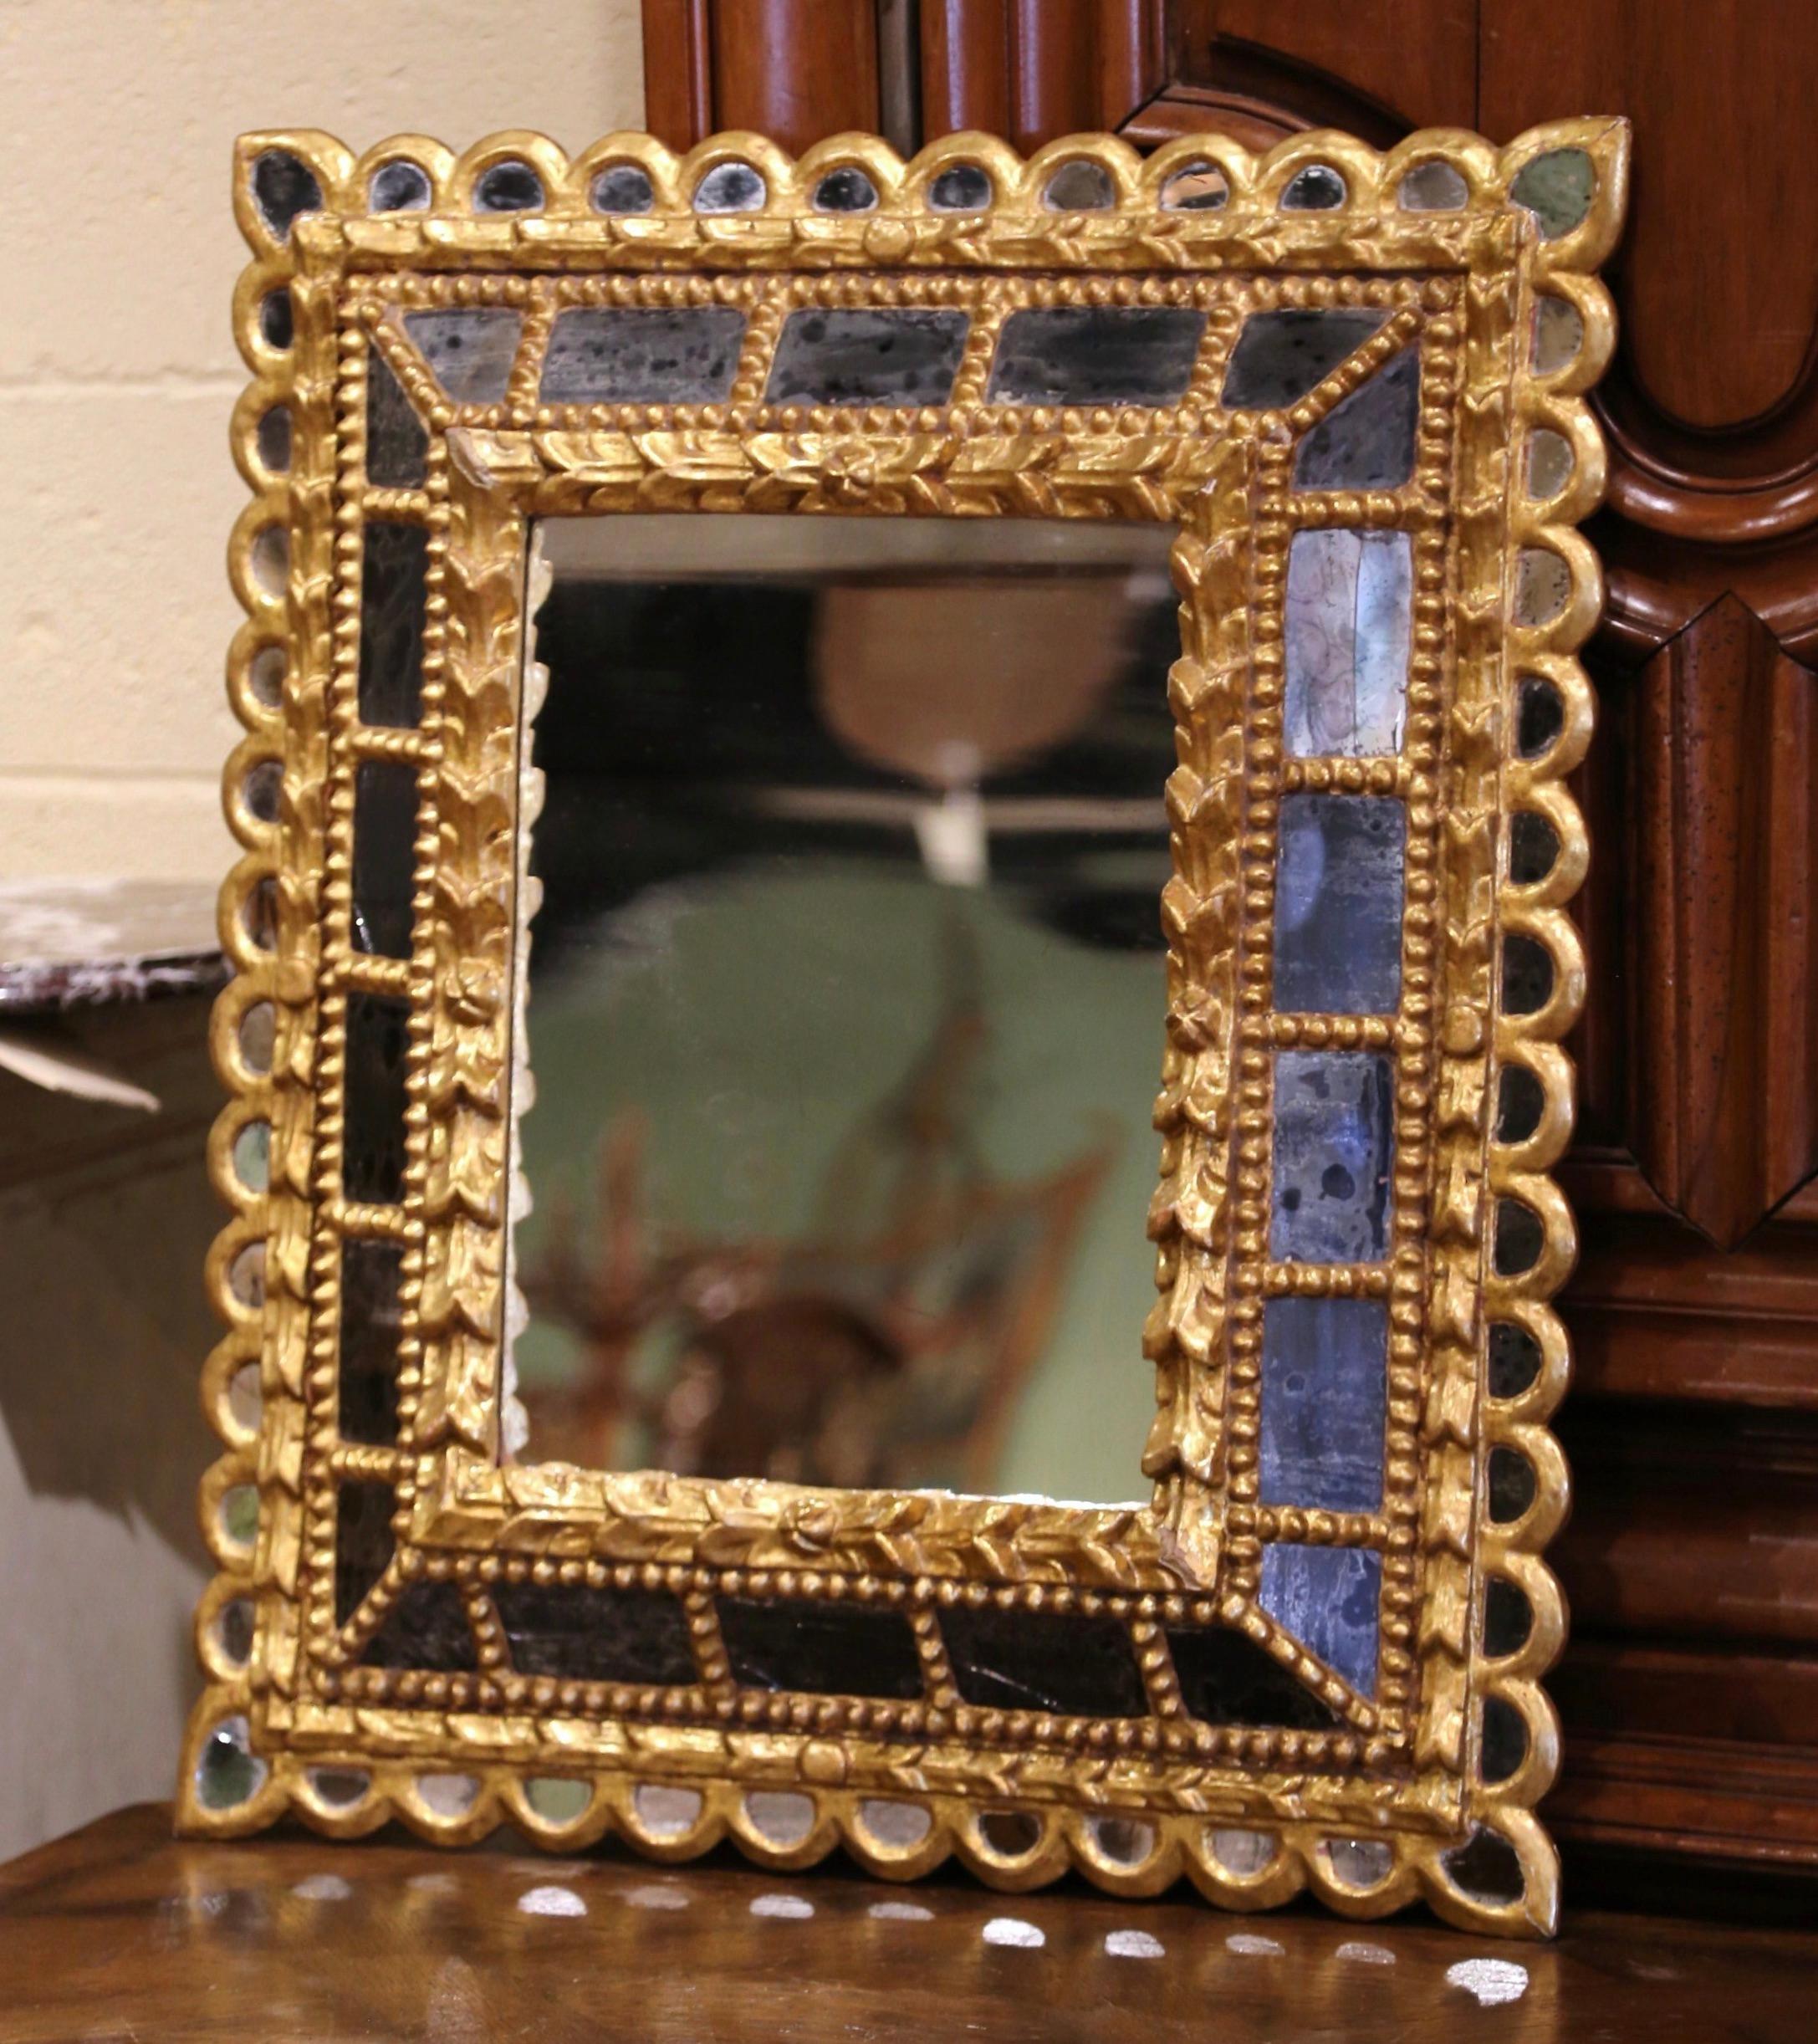 This elegant vintage sun mirror was crafted in France, circa 1920. Rectangular in shape the large antique wall mirror features a raised center mirror with mercury glass set inside a carved frame; the four sides are decorated with small overlay